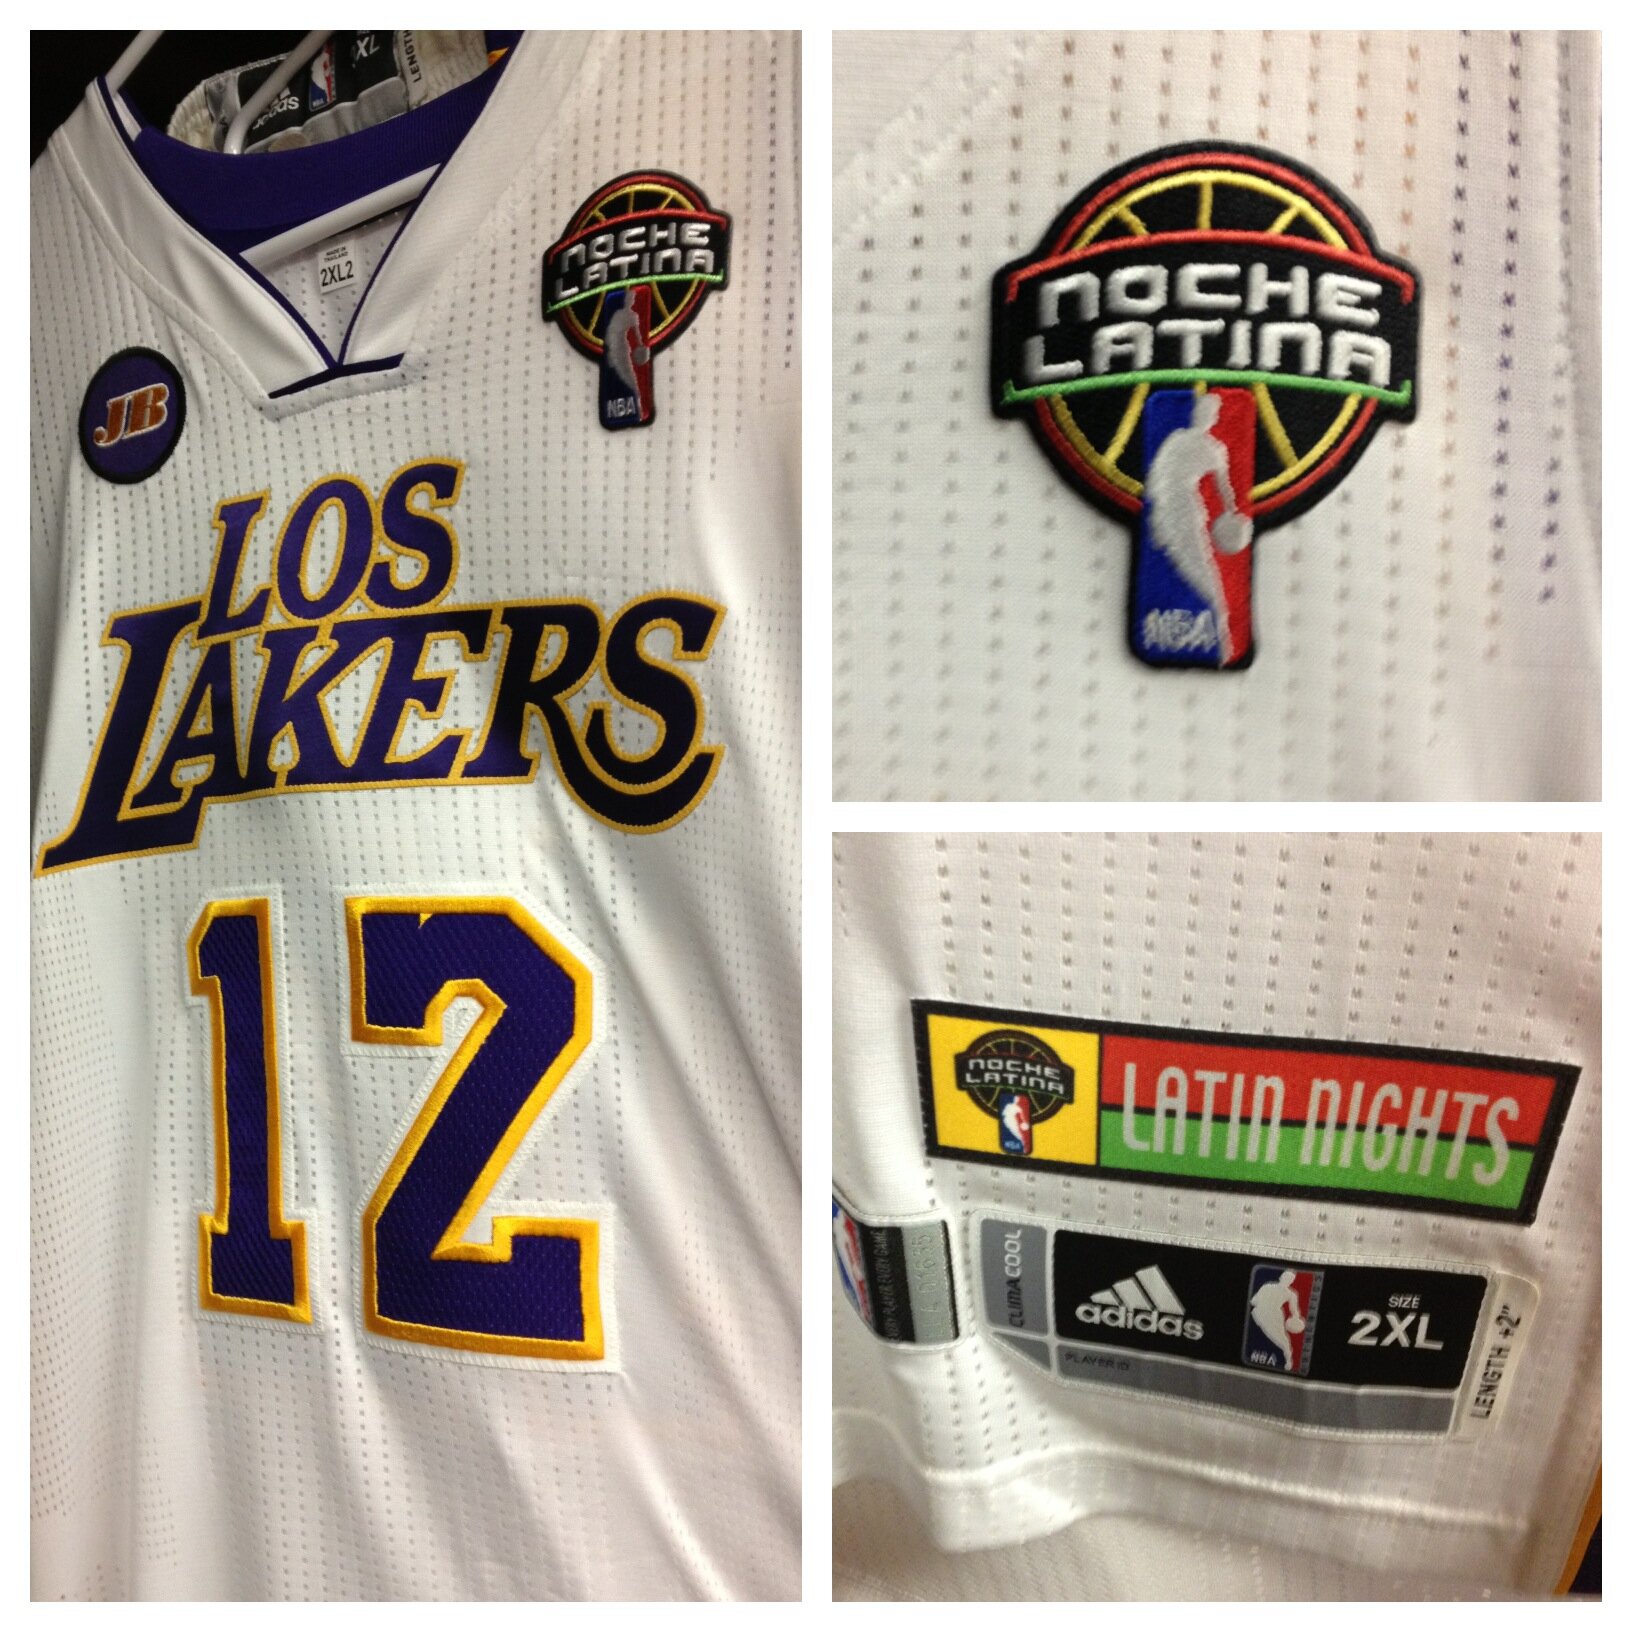 Los Angeles Lakers on X: Rocking the #LosLakers jerseys for the